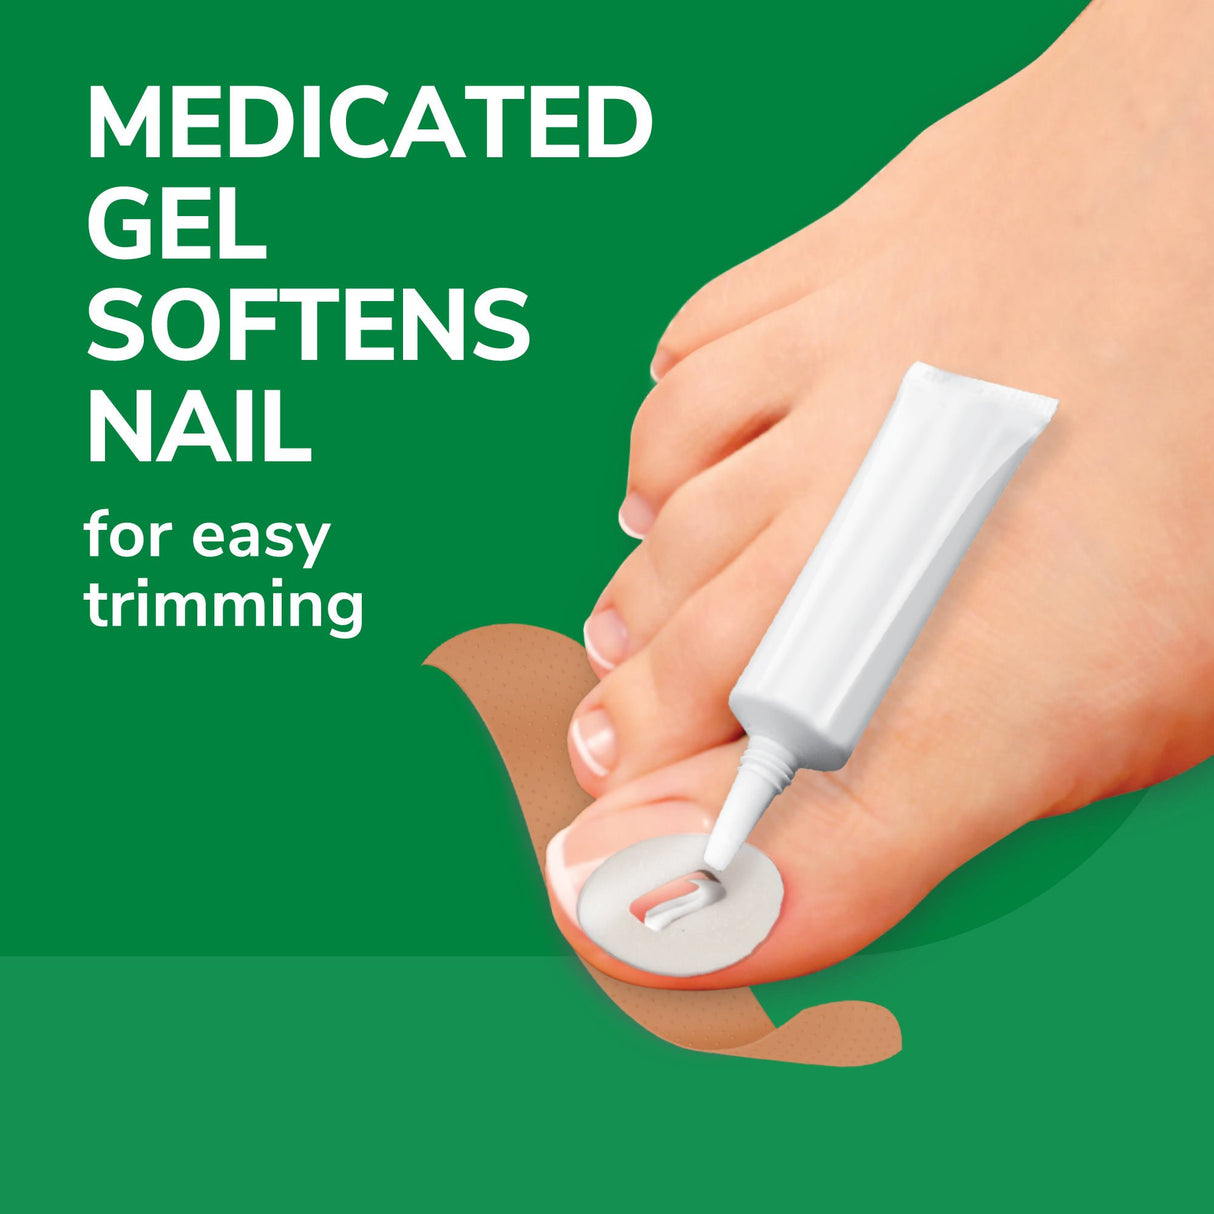 image of medicated gel softens nail for easy trimming